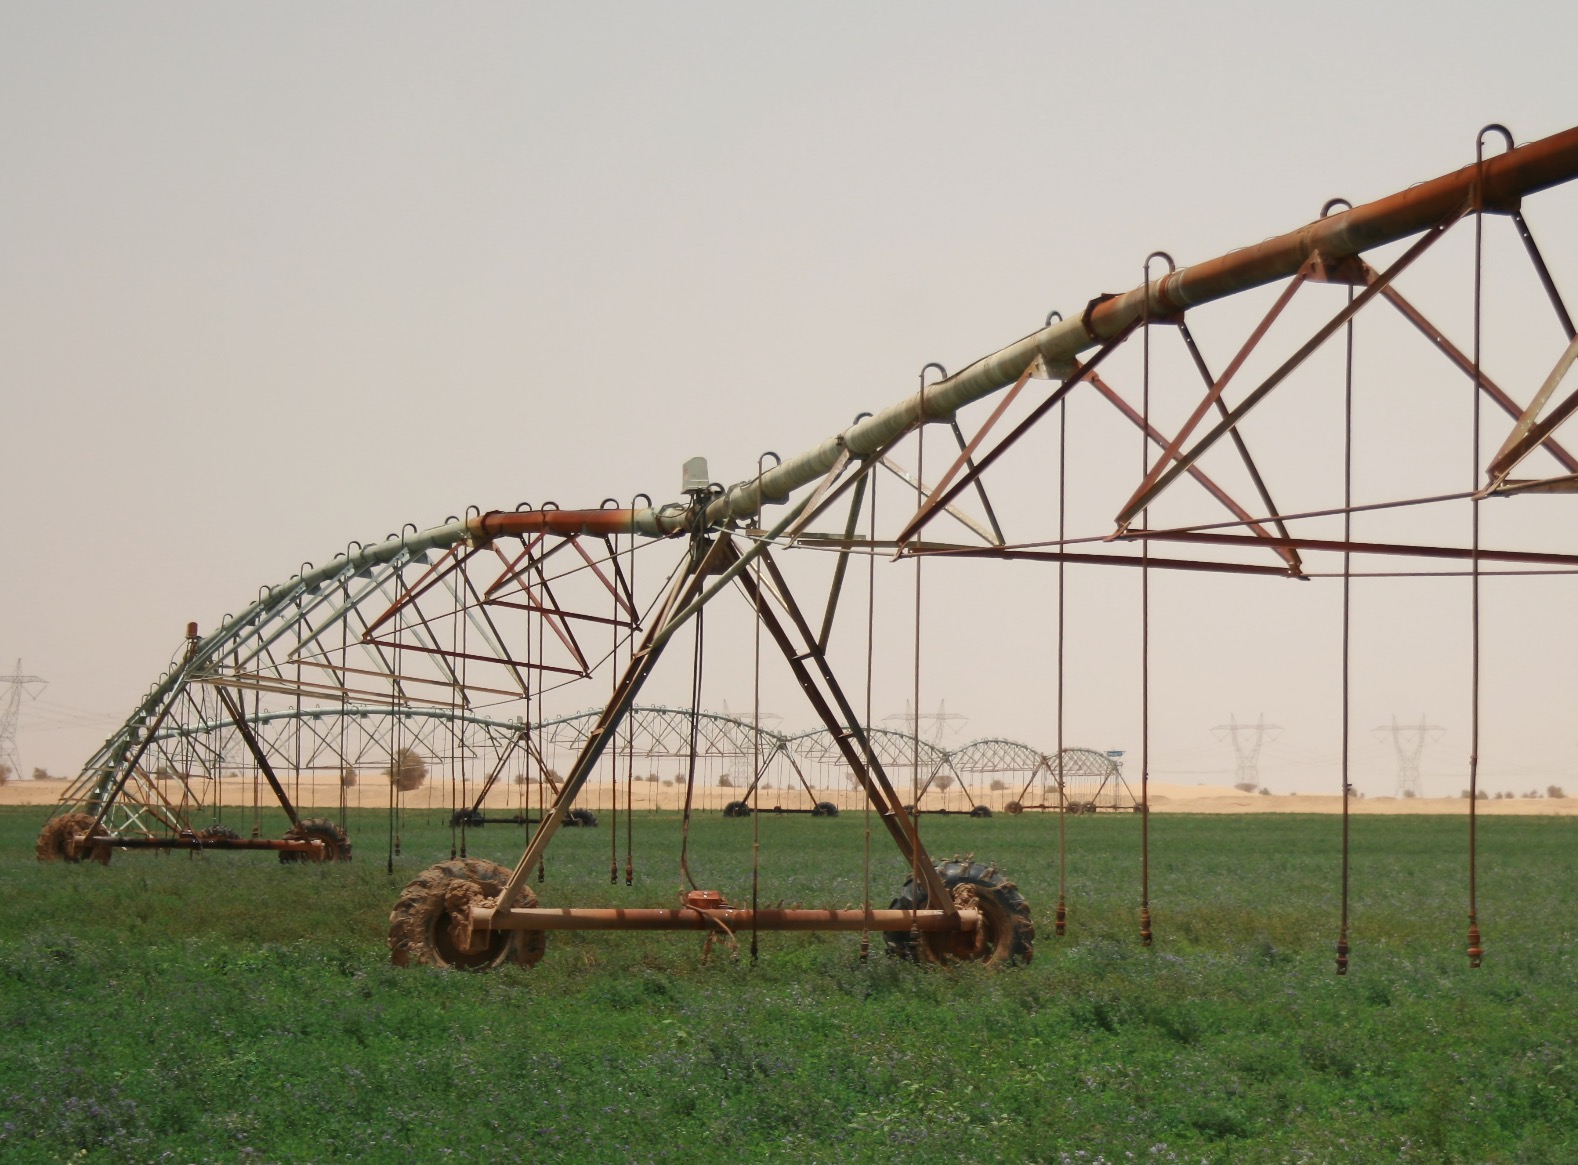 Typical issue of a pivot damaged by corrosion due to bad water quality.